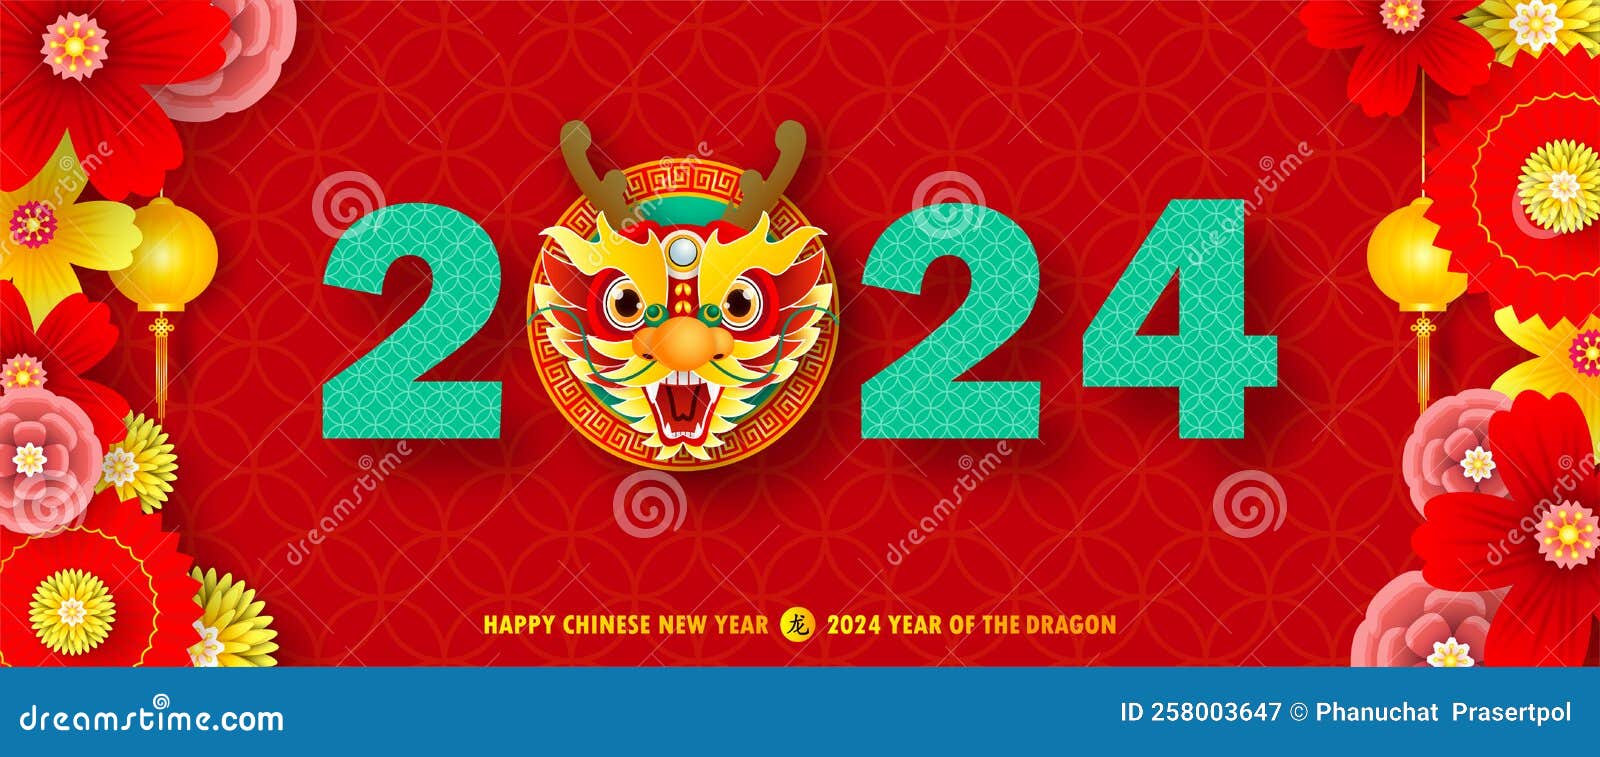 happy chinese new year 2024 year of the dragon zodiac sign with flower,lantern, fan s gong xi fa cai, greeting card paper